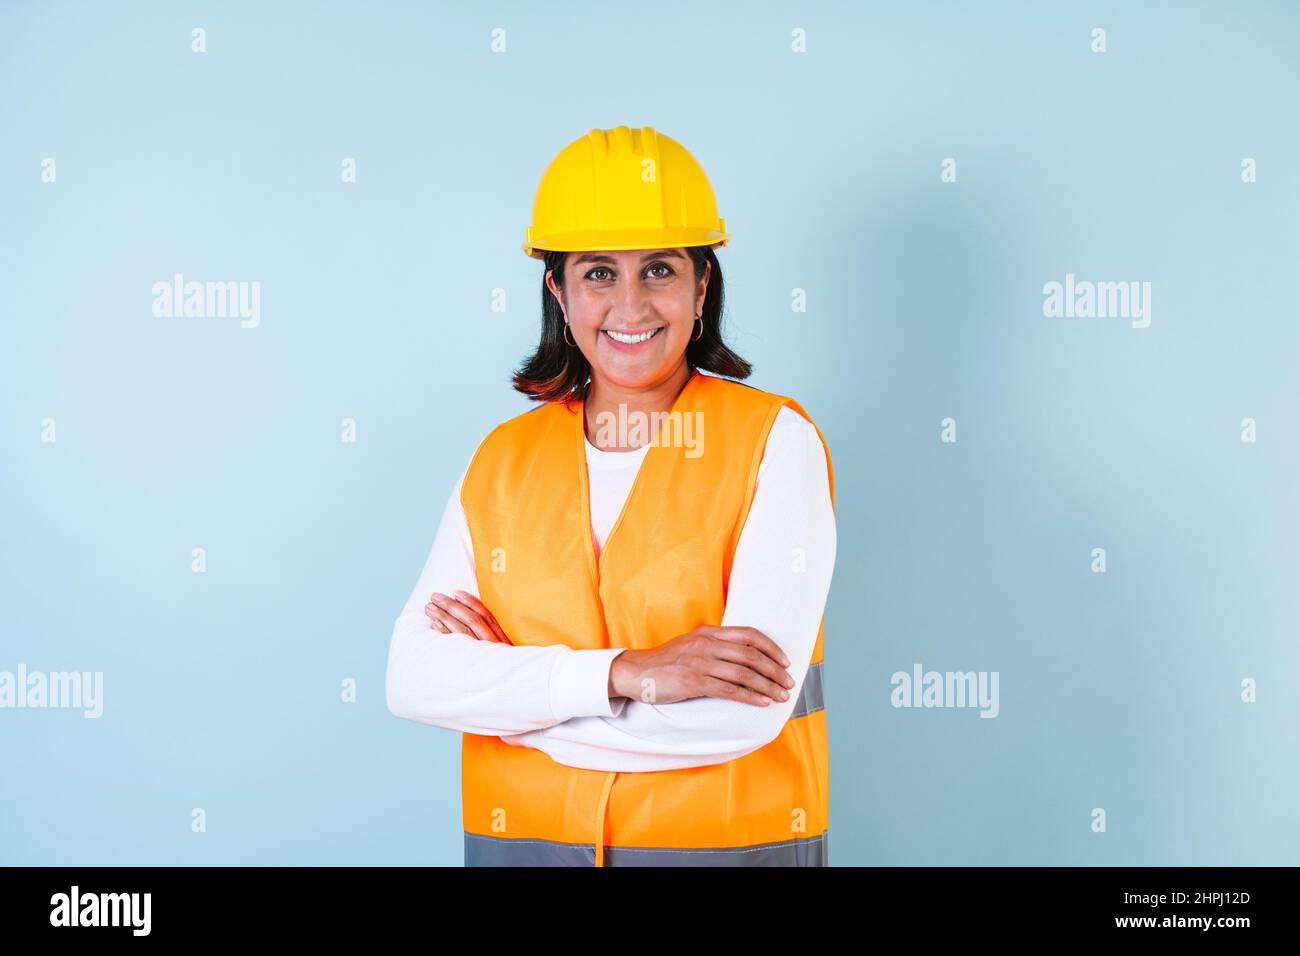 Hispanic woman Professional engineering and worker with helmet in Mexico Latin America Stock Photo